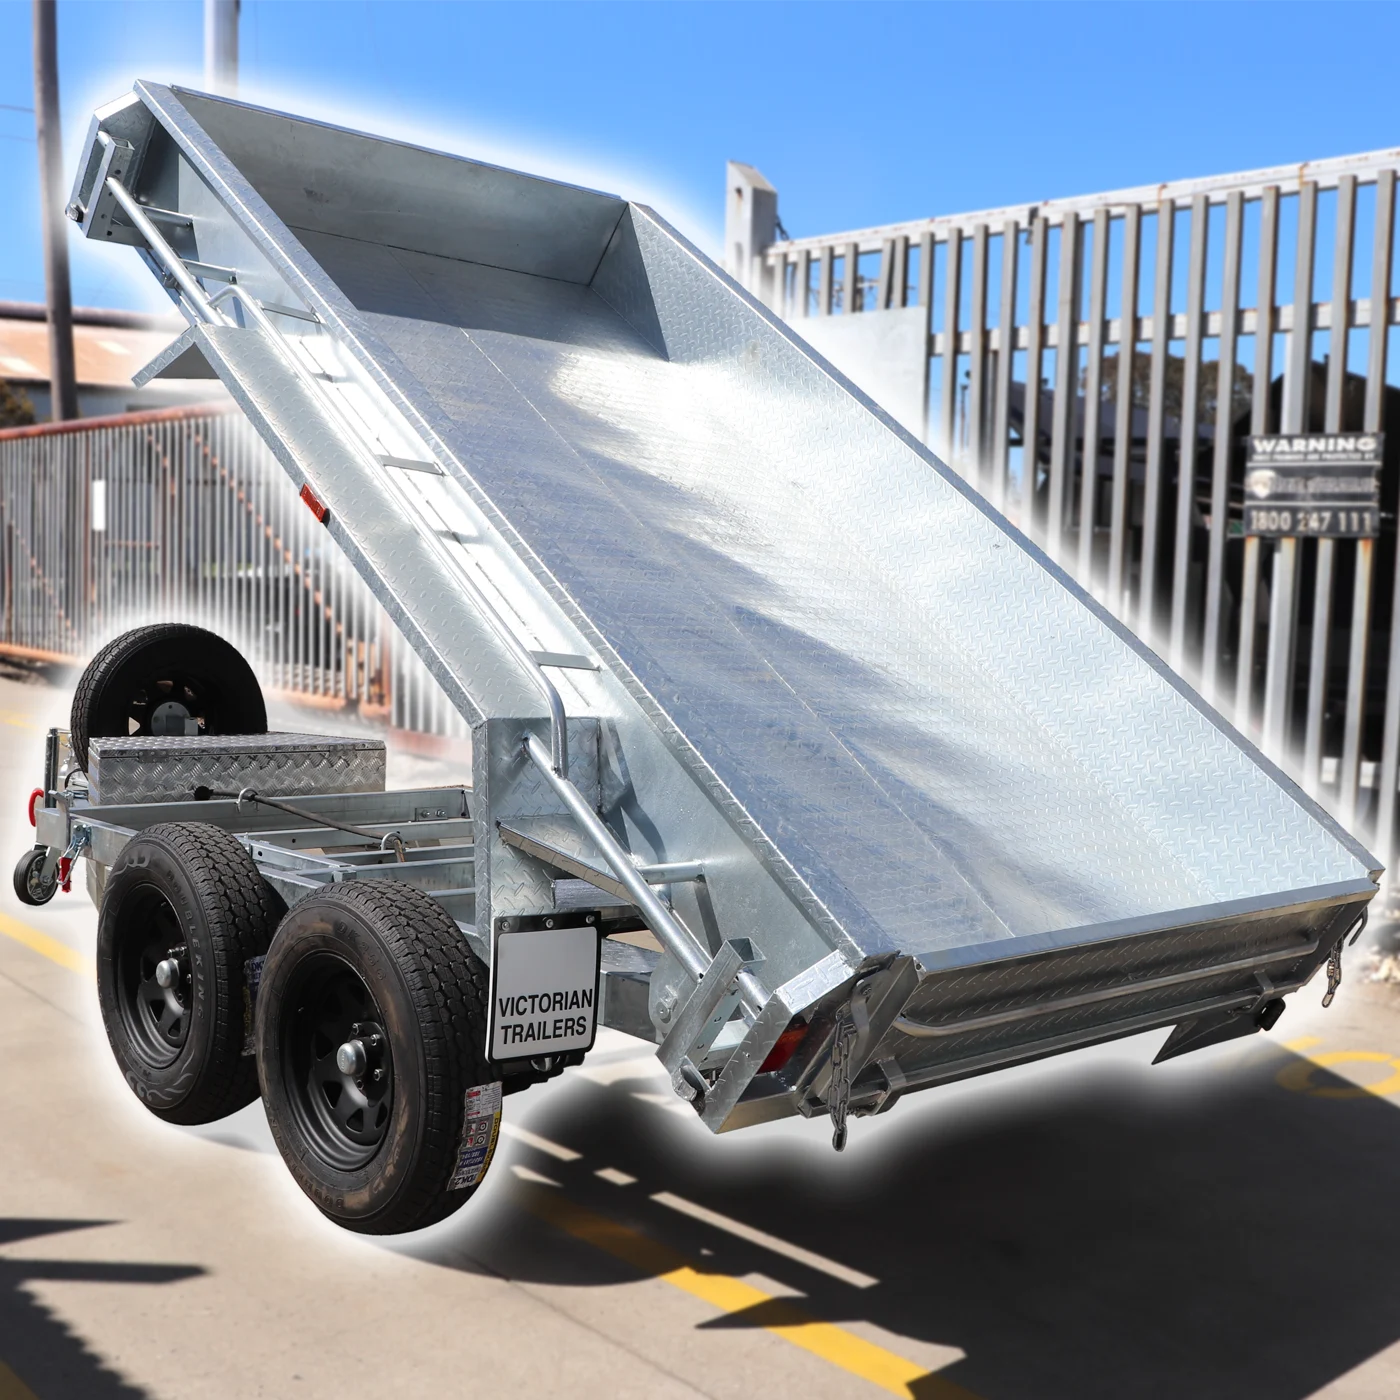 10x5 Galvanised Hydraulic Tipper Trailer for Sale Melbourne